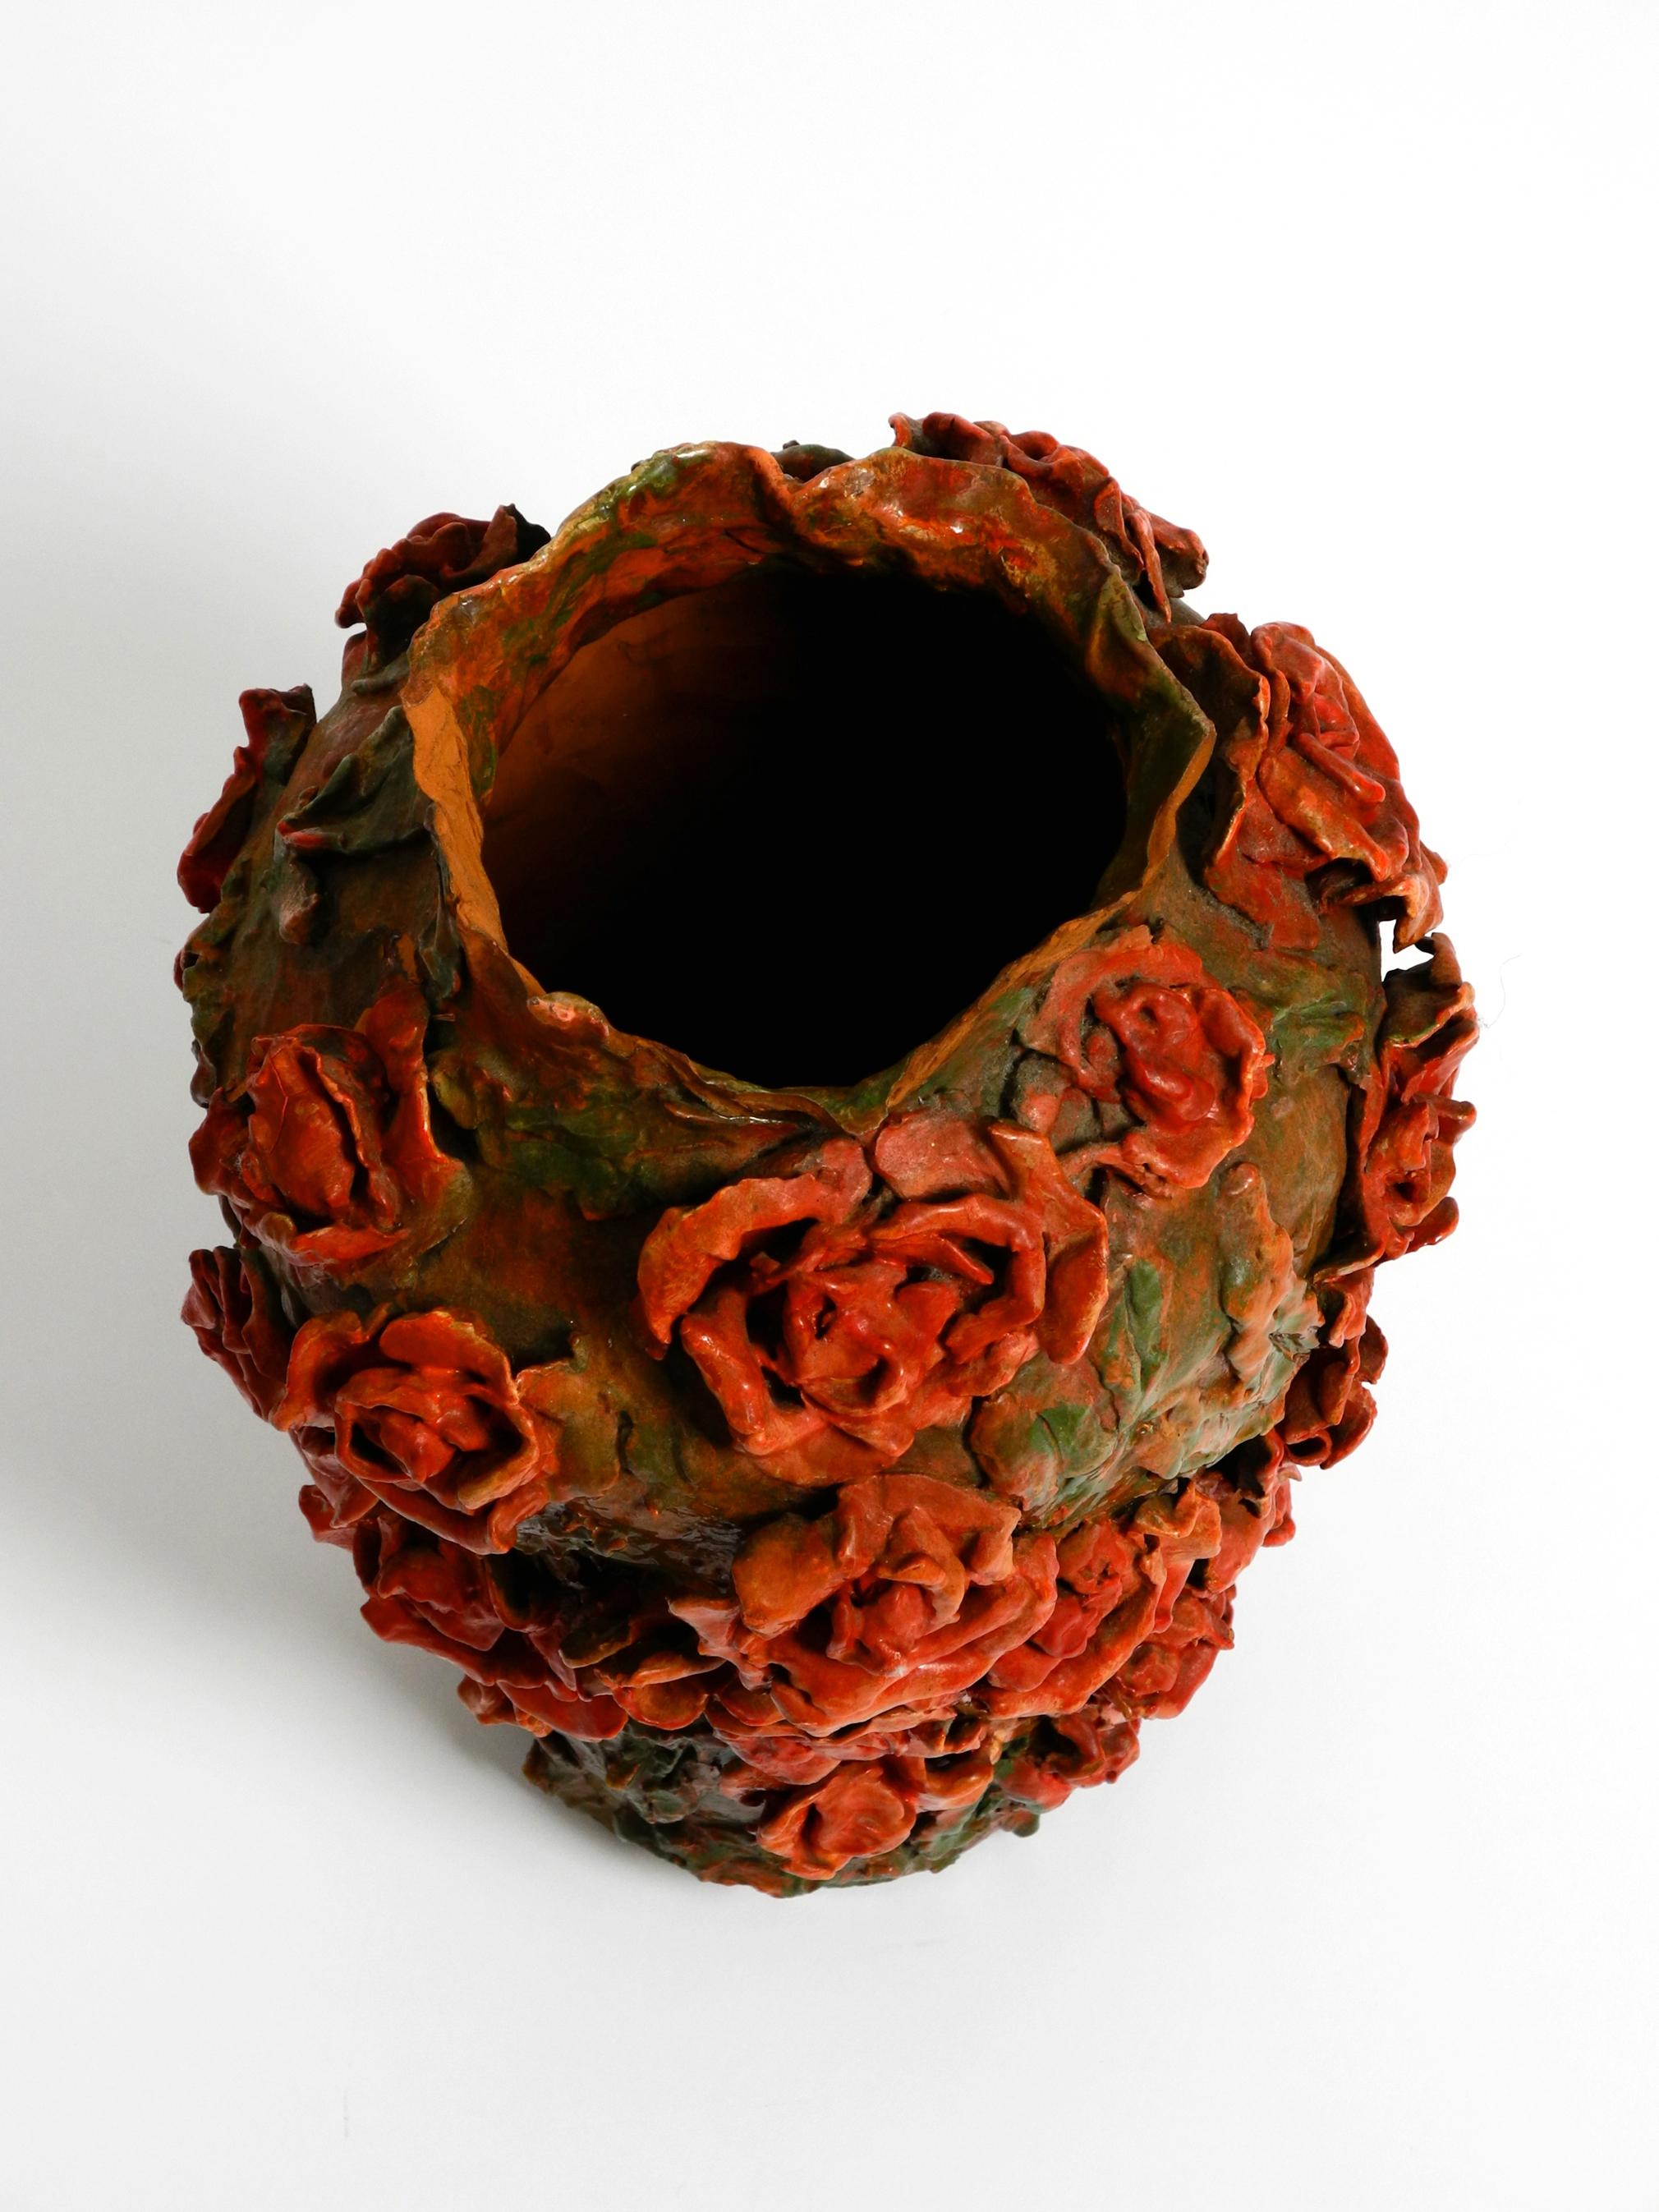 Handmade Clay Vase in Green-Brown with Red Roses by Rosie Fridrin Rieger 1918 For Sale 2